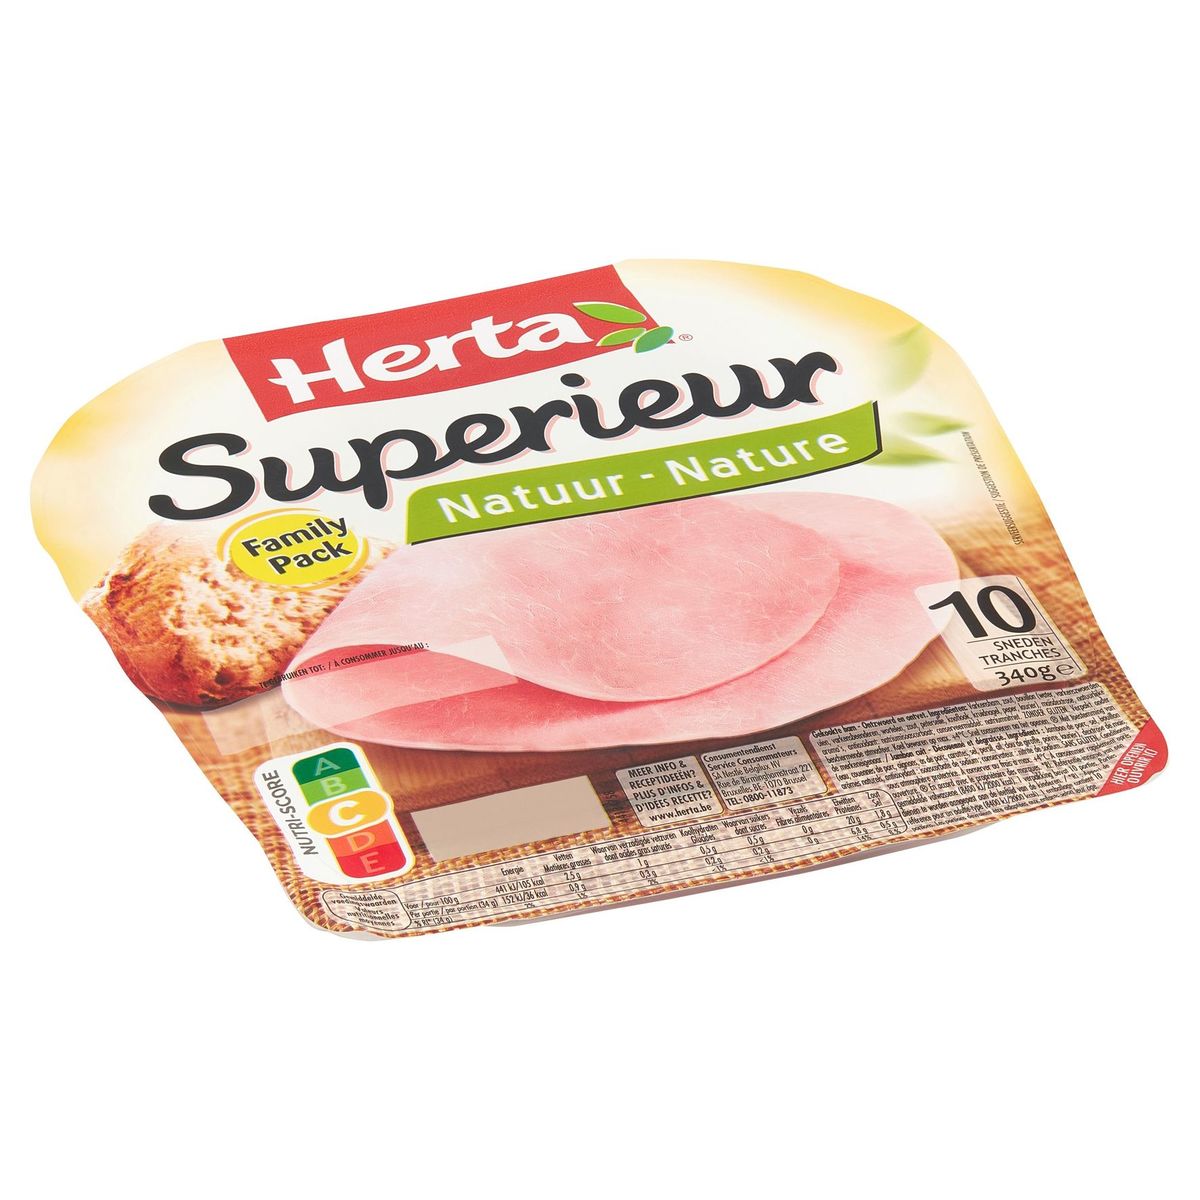 Herta Superieur Nature Family Pack 10 Tranches 340 g